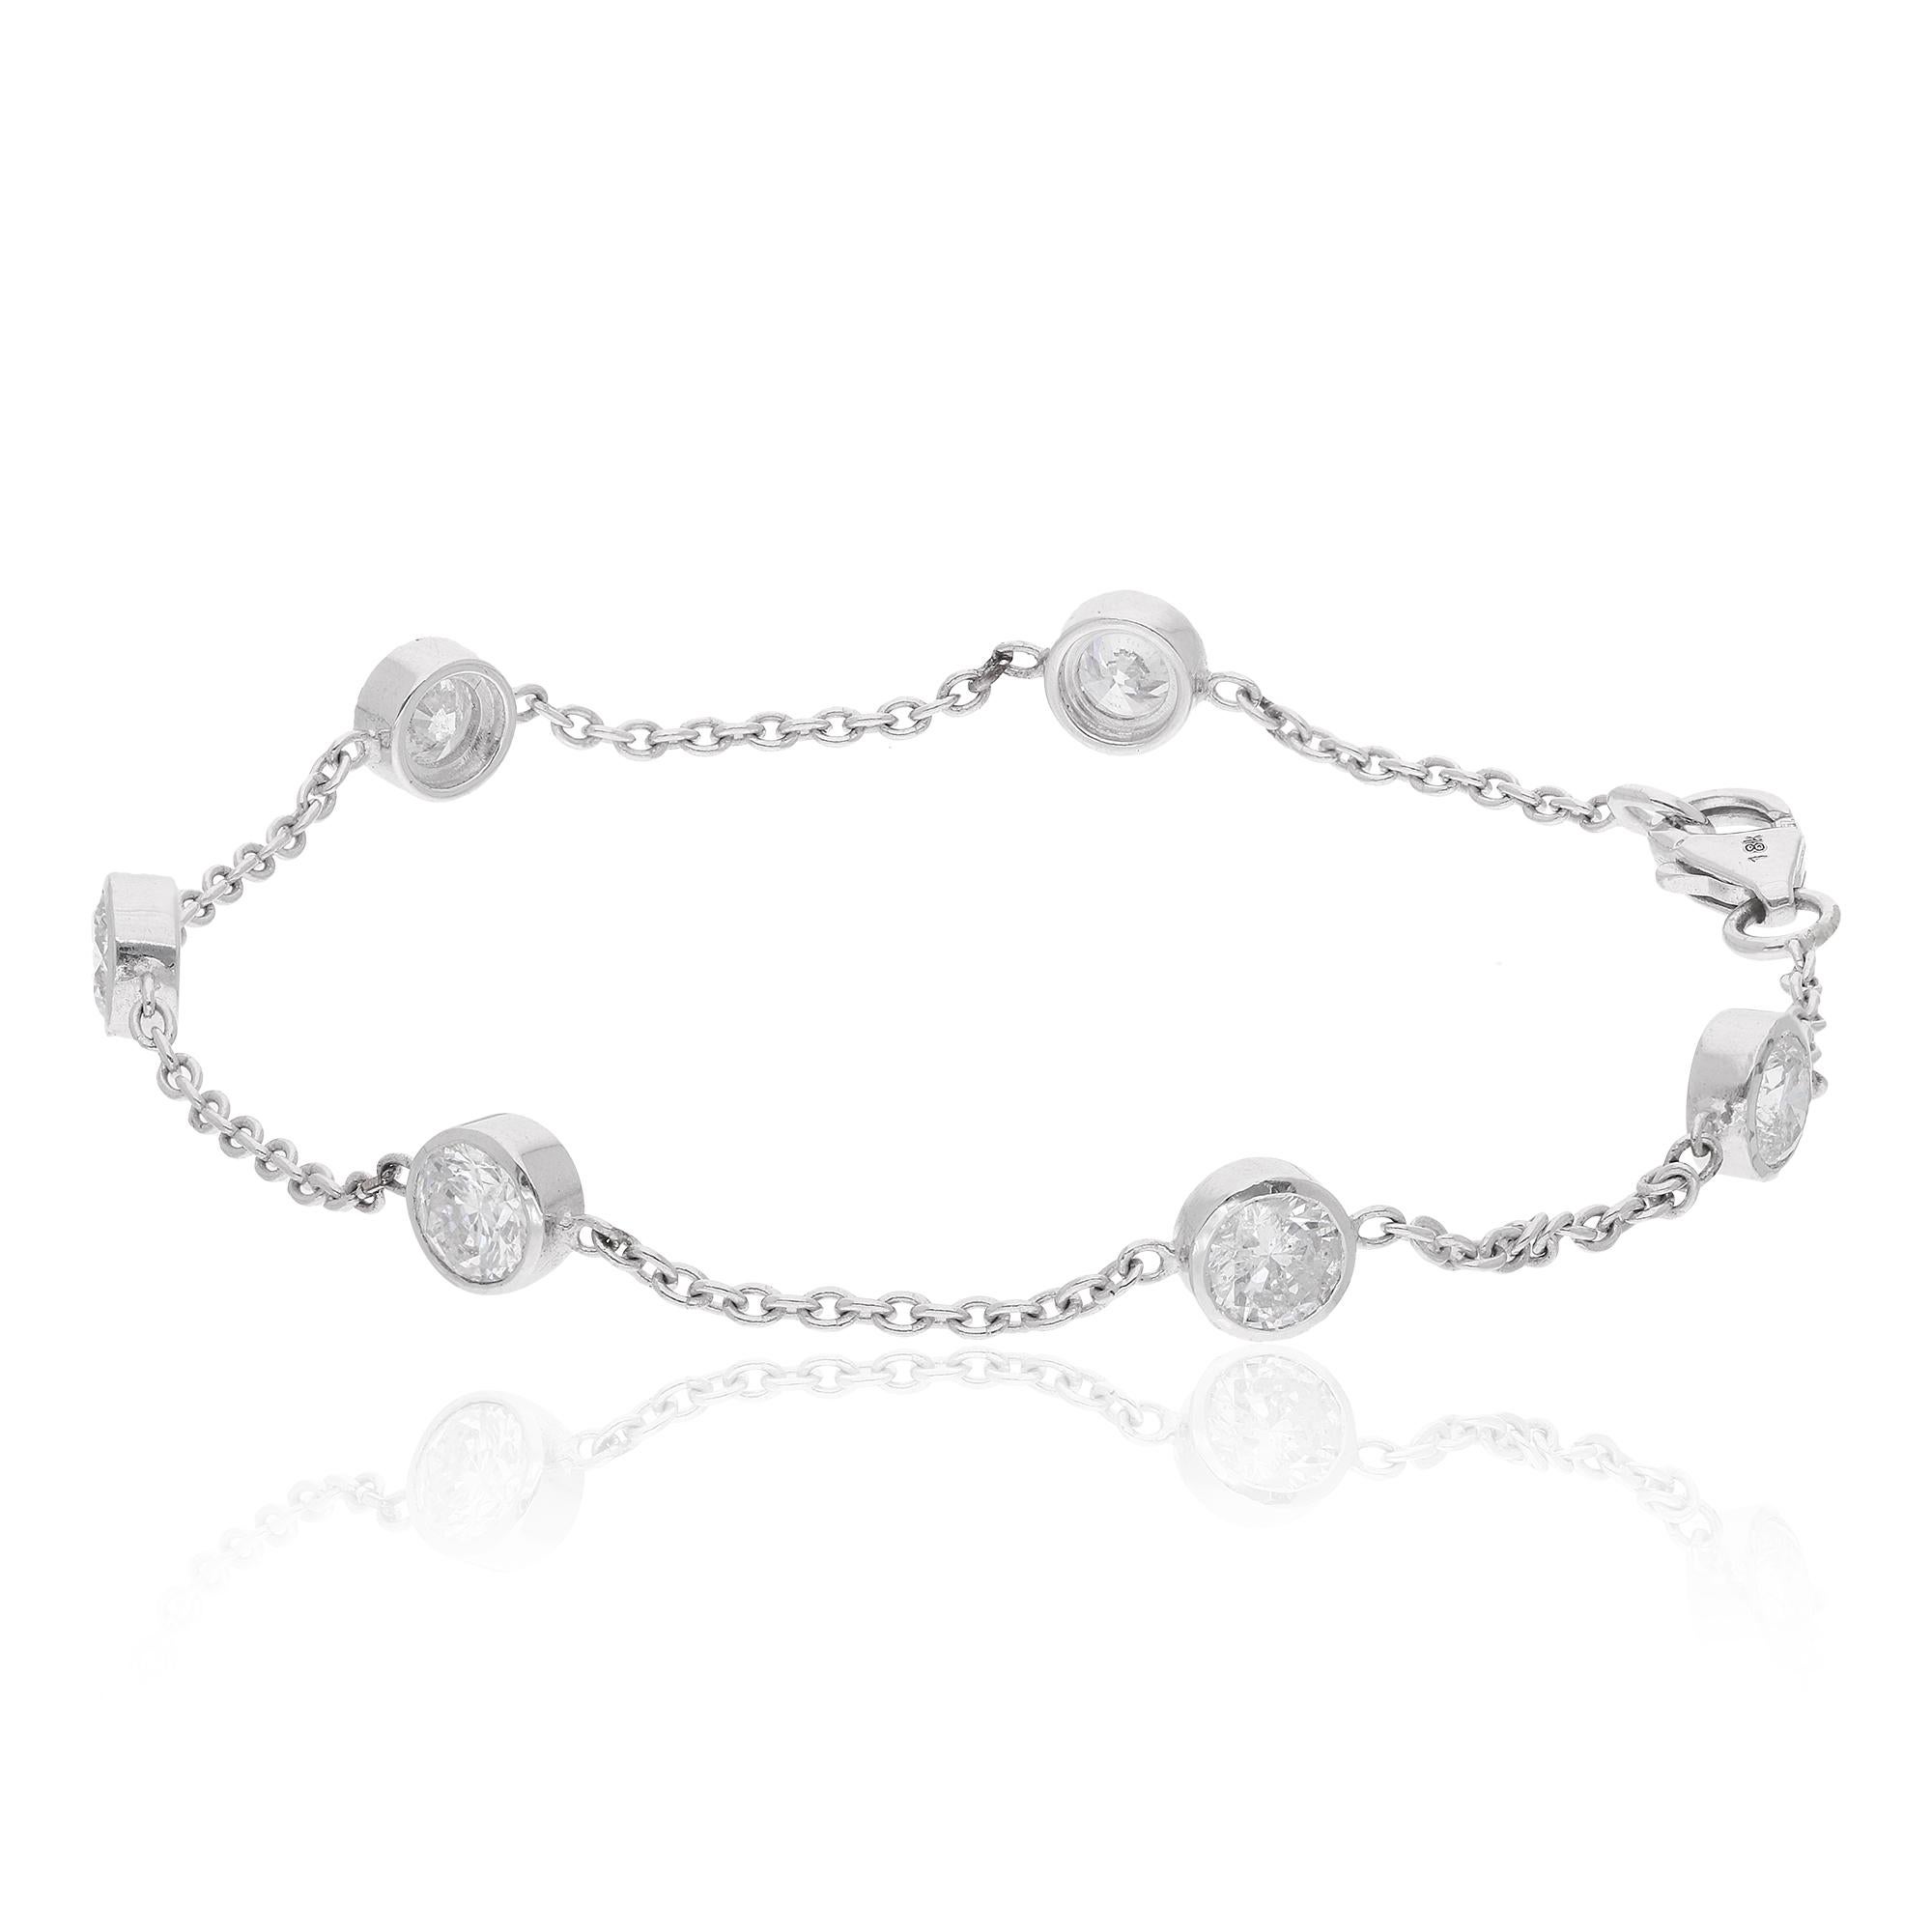 Step into the realm of timeless elegance with this exquisite natural 1.91 carat round diamond bezel set bracelet, meticulously crafted in radiant 14 karat white gold. Delicately designed and expertly executed, this bracelet embodies sophistication